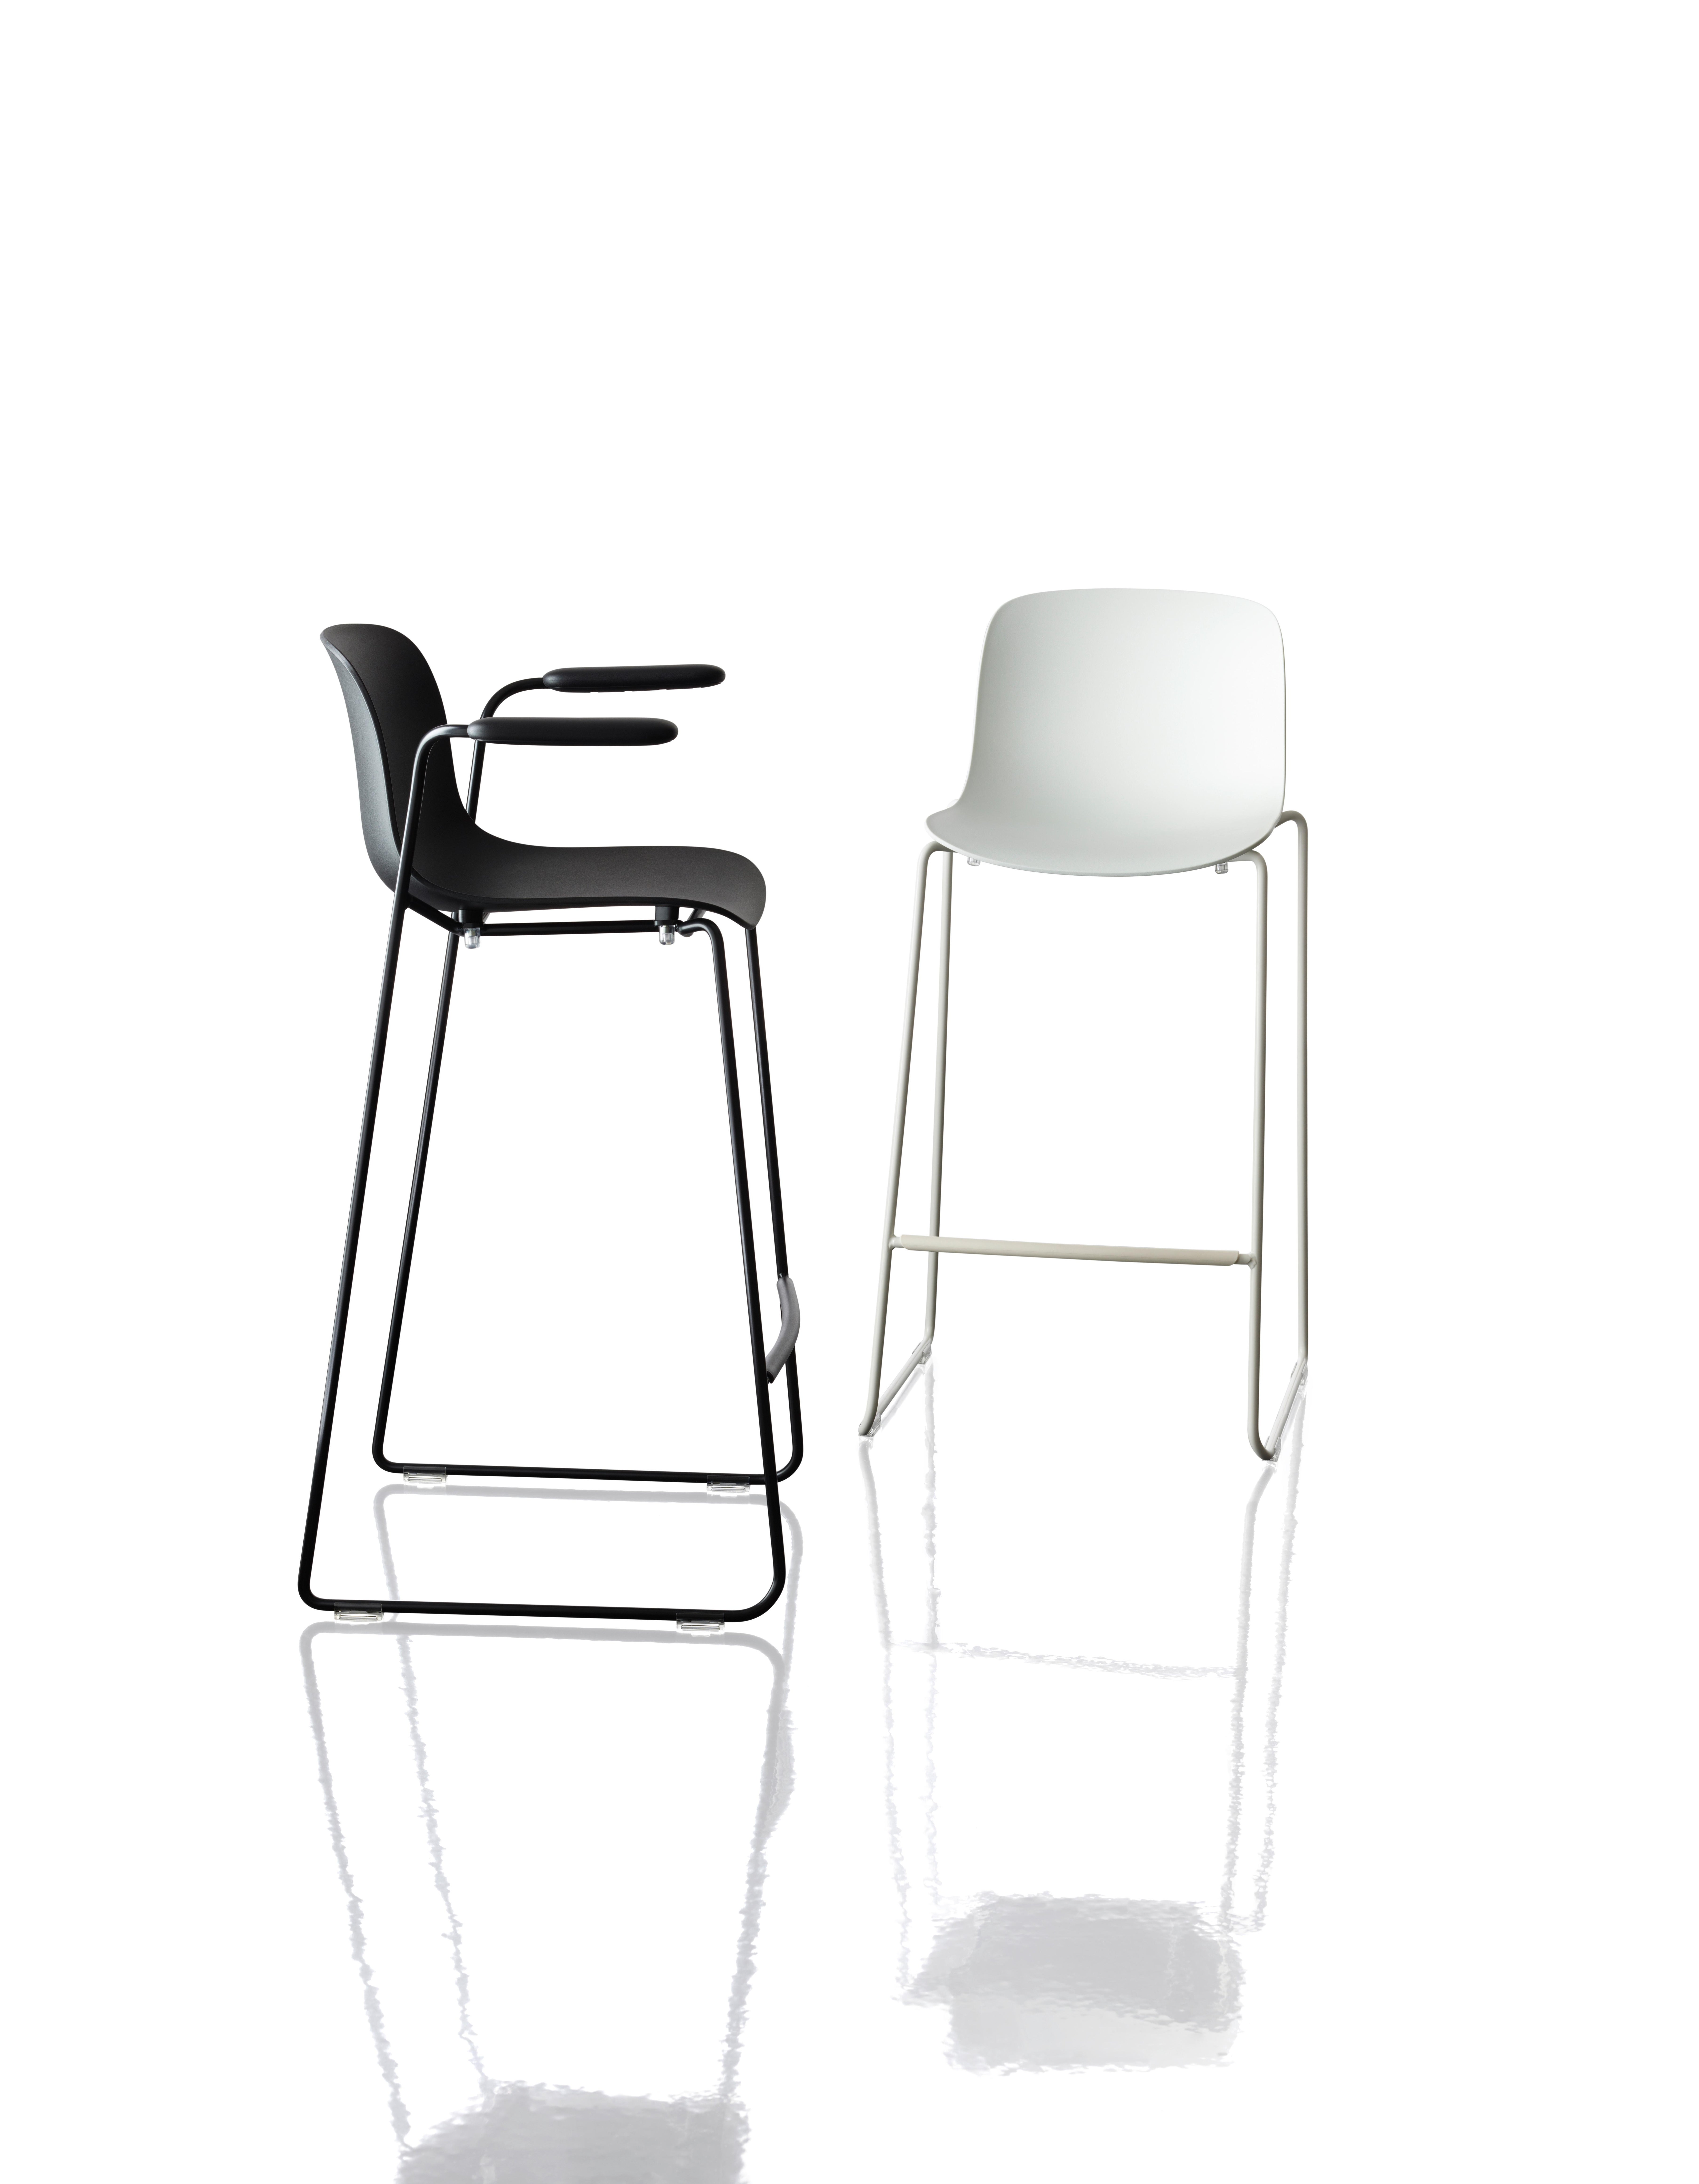 Troy is a concept of remarkable simplicity and comfort that gives shape to practically endless possible variations, playing on the use of different materials, combinations and seat types. This vast and various assortment with over two thousand